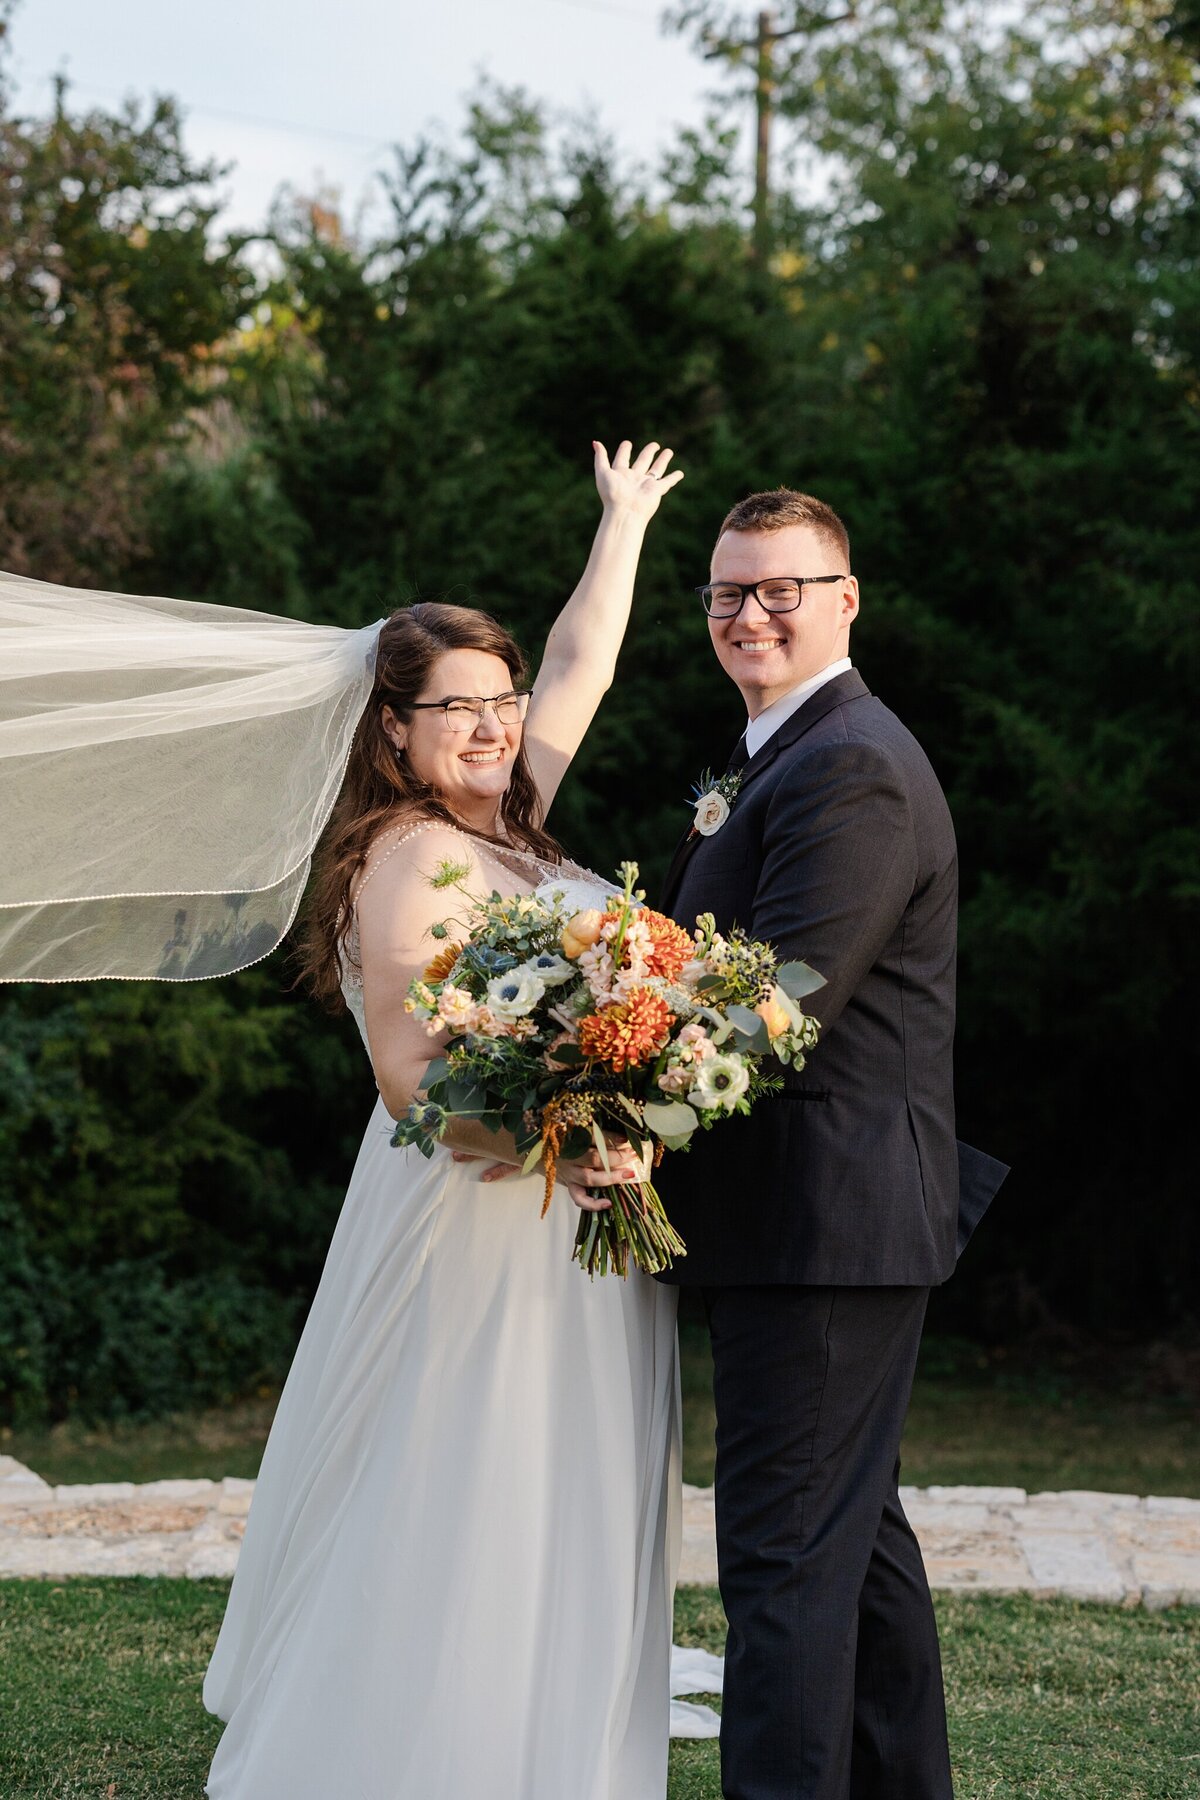 A portrait of a bride and groom posing outside after their wedding ceremony at The Laurel in Grapevine, Texas. The bride is on the left and is wearing a long flowing, sleeveless, white dress with a long veil flowing out behind her while holding a large, colorful bouquet. The groom is on the right and is waring a dark suit with a boutonniere.